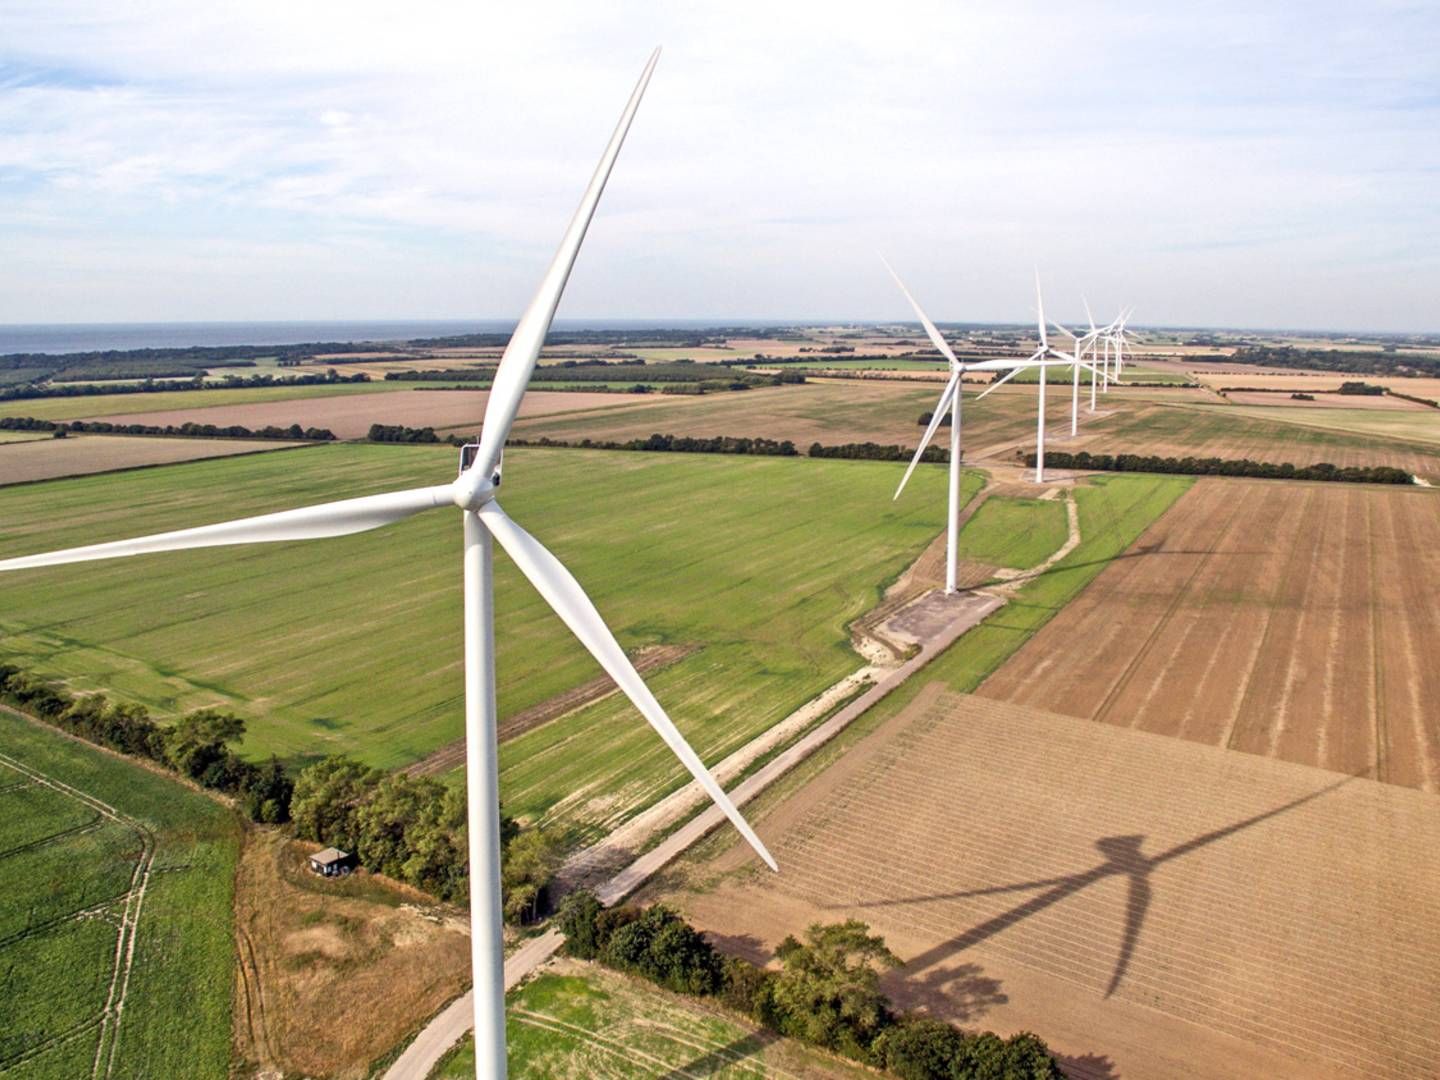 The deal was signed in January for Vestas to supply seven mode V117 wind turbines to the project. | Photo: PR Vestas